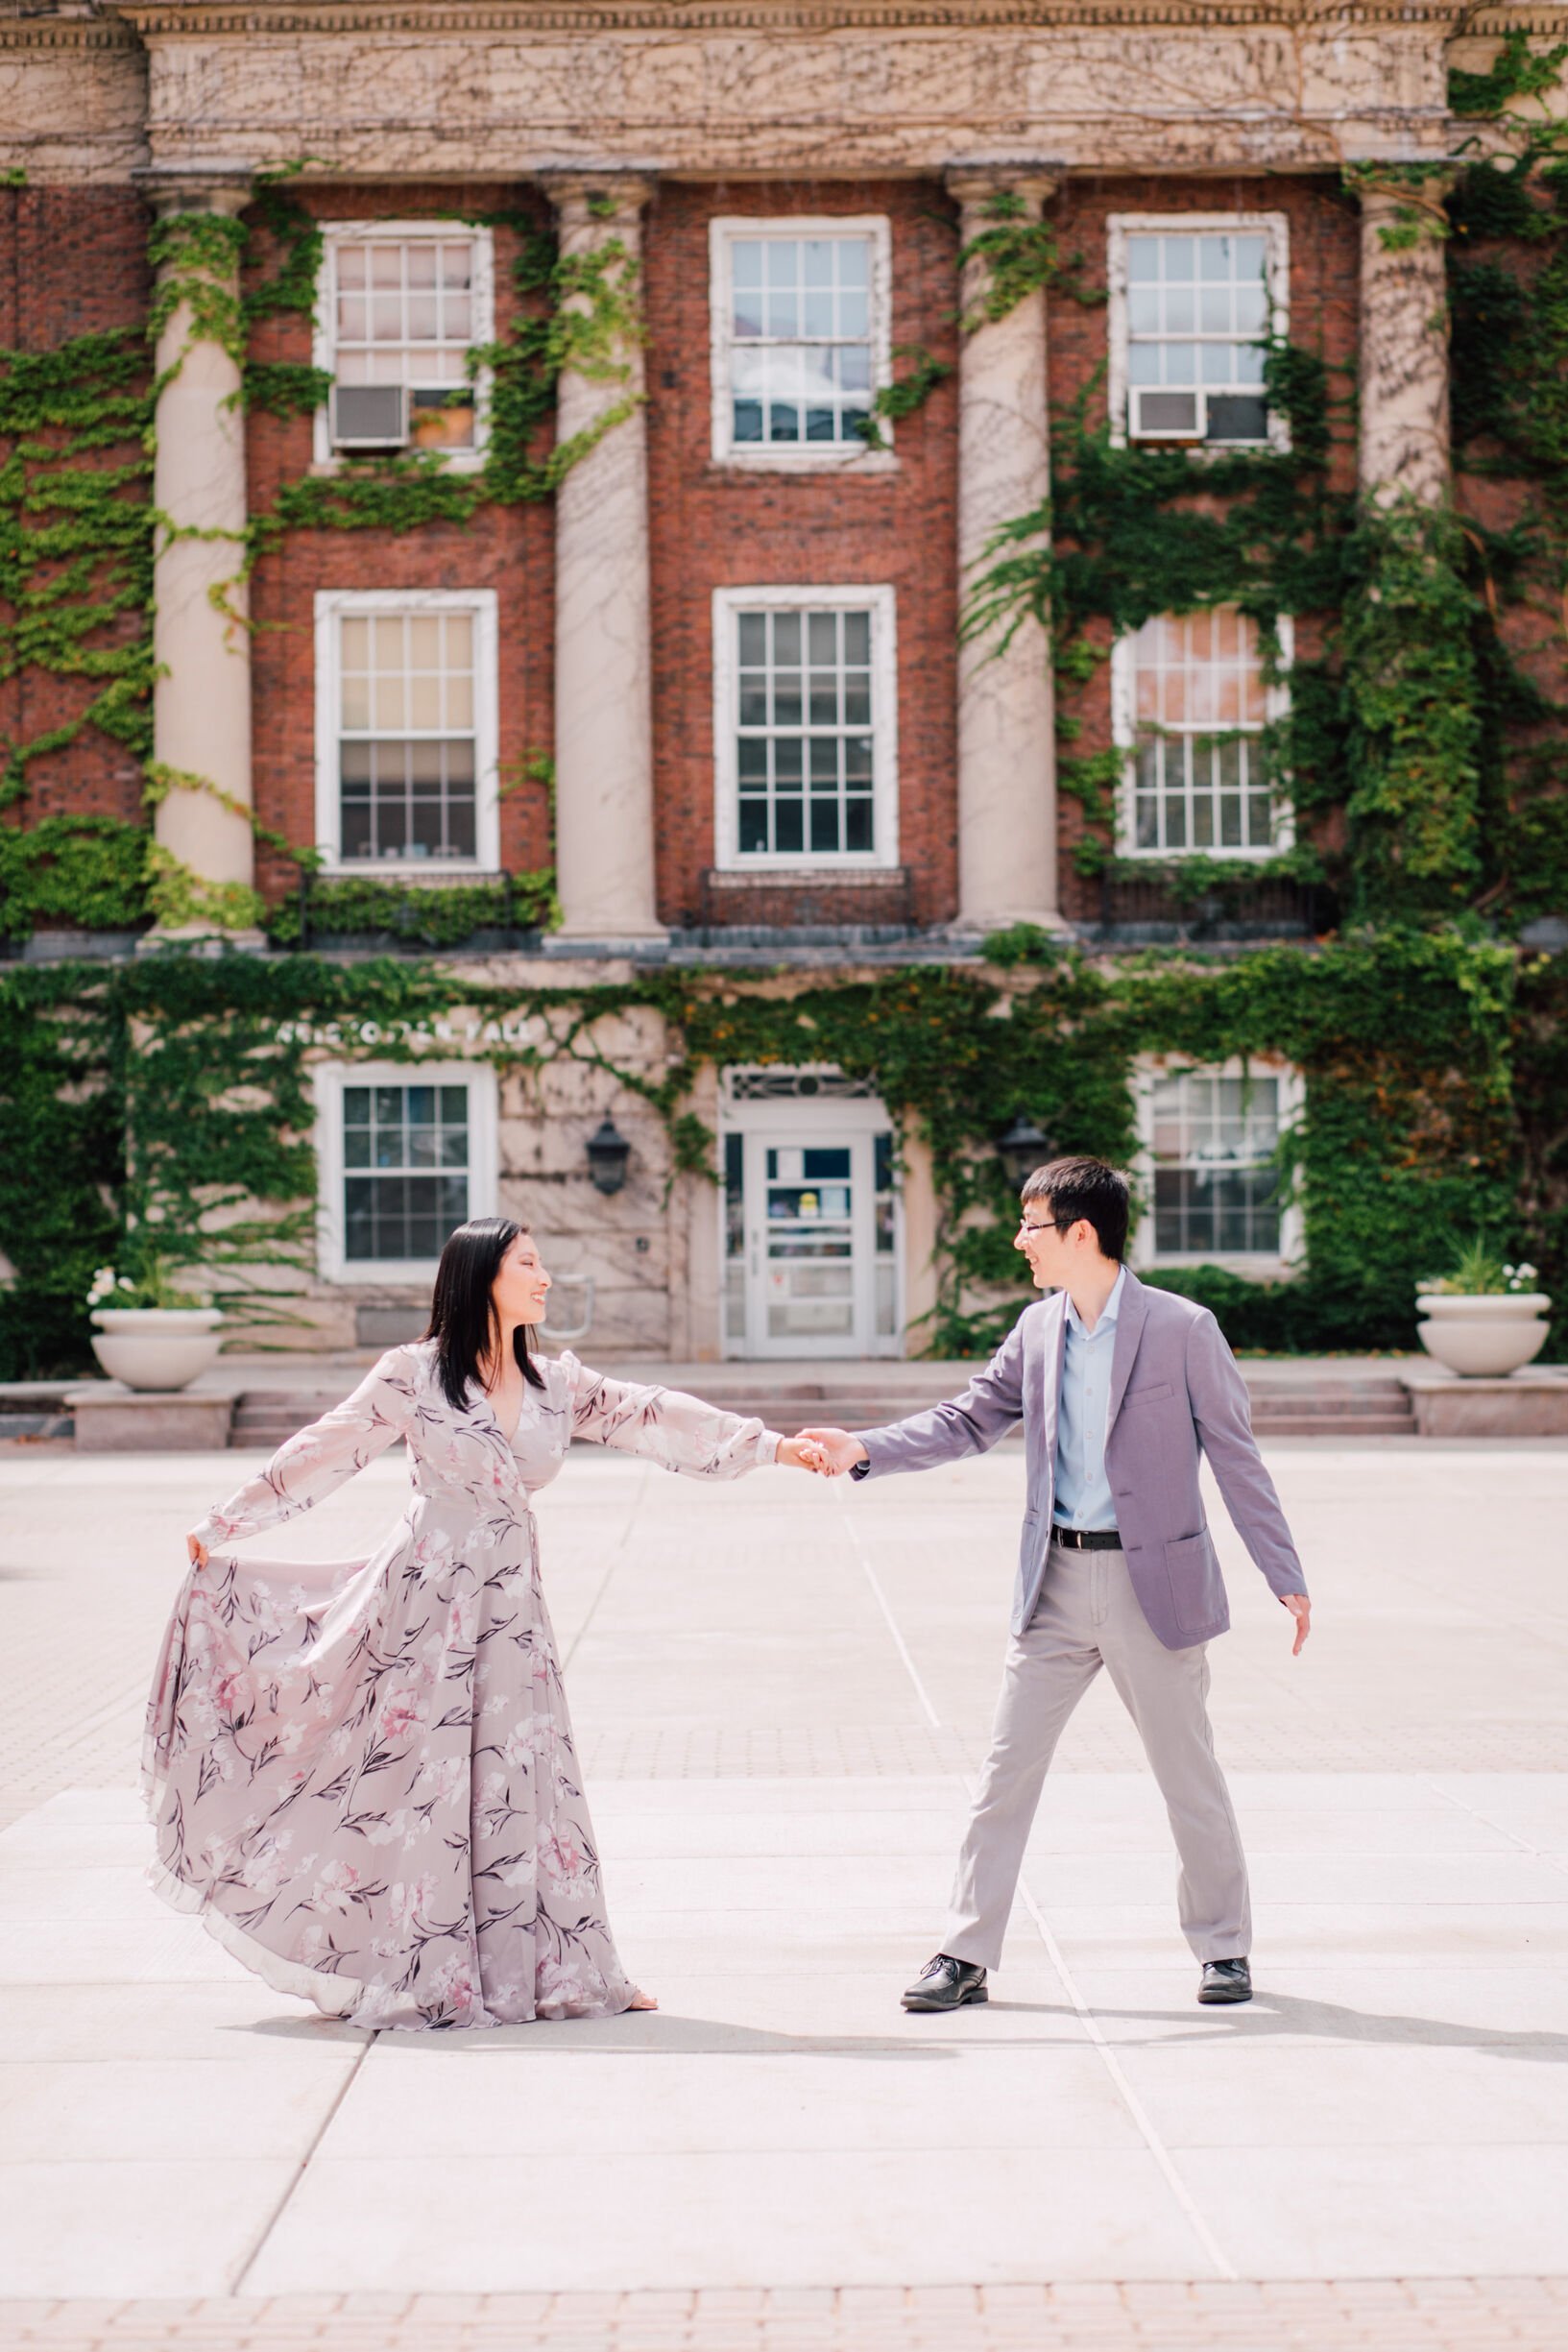  Engaged couple dance in front of the college where they met, SUNY upstate 